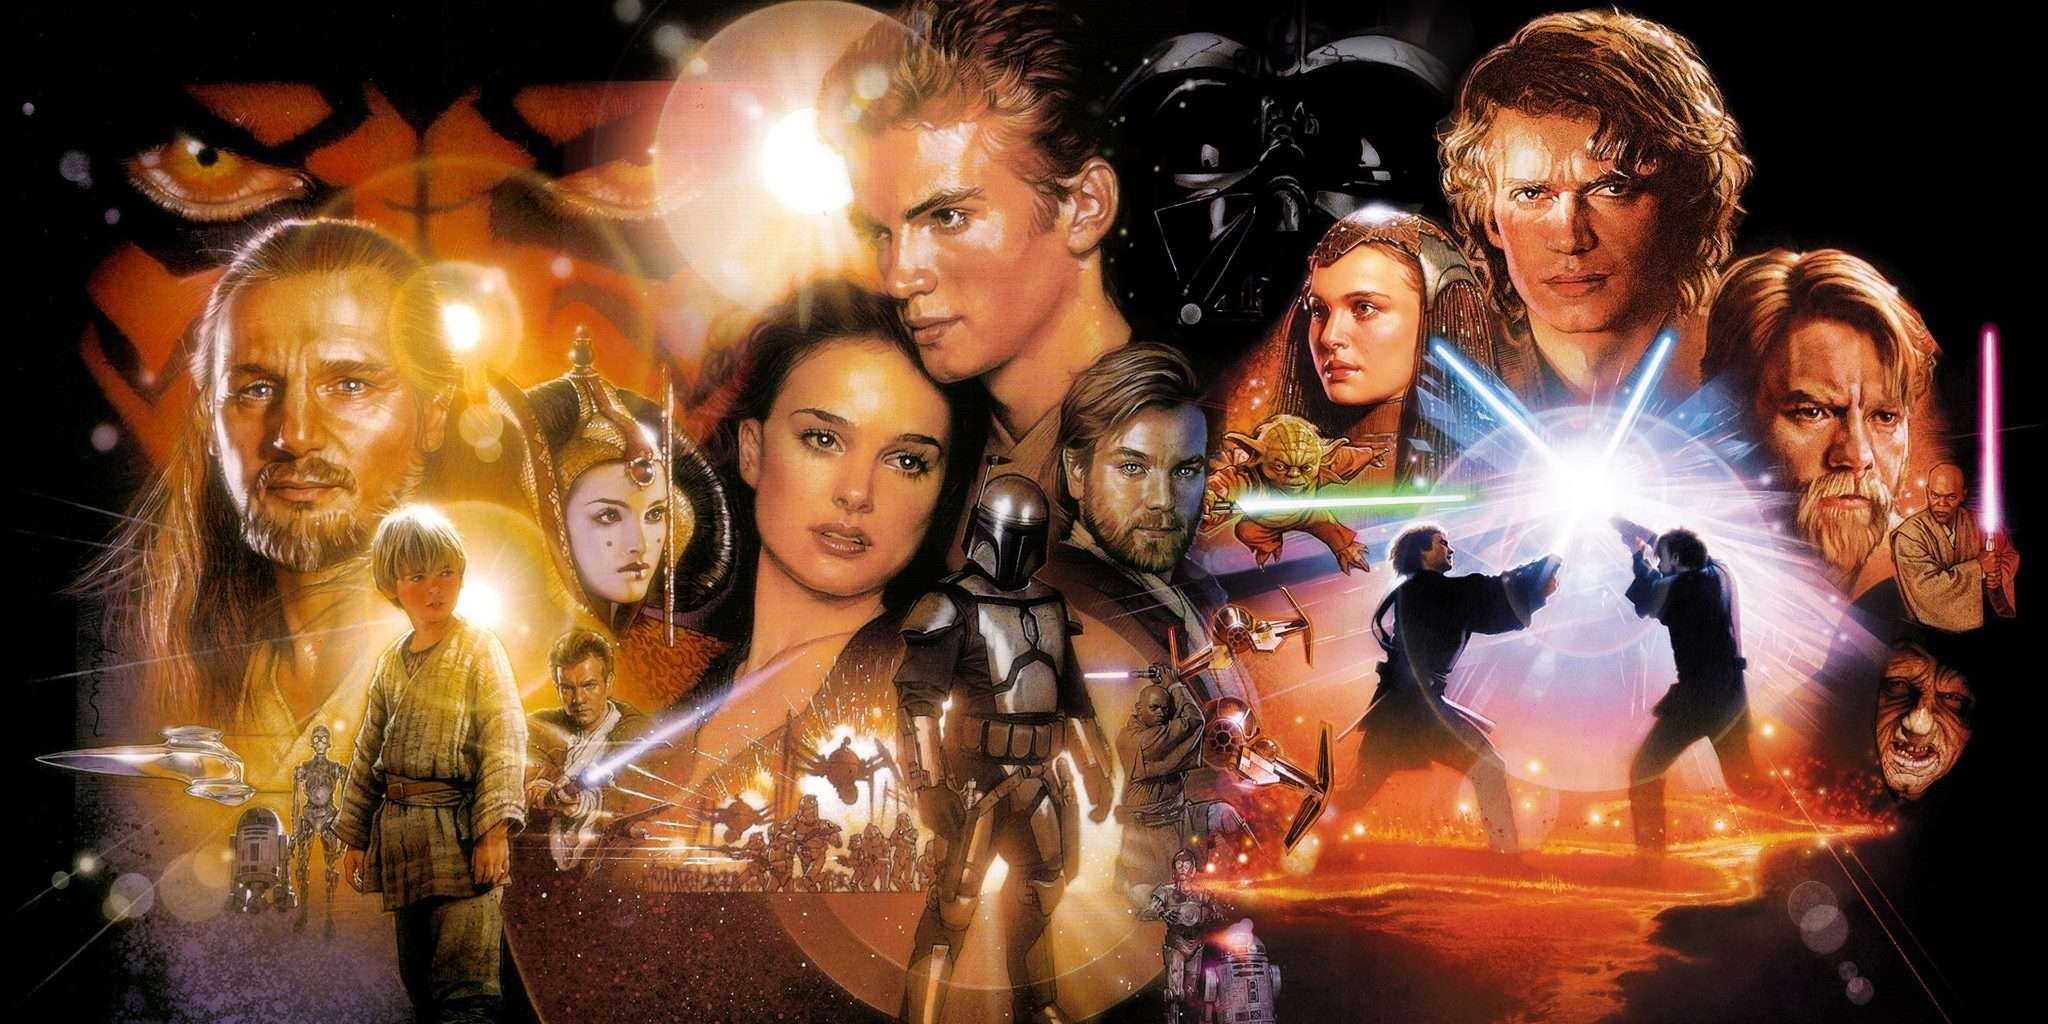 The Star Wars prequel trilogy posters